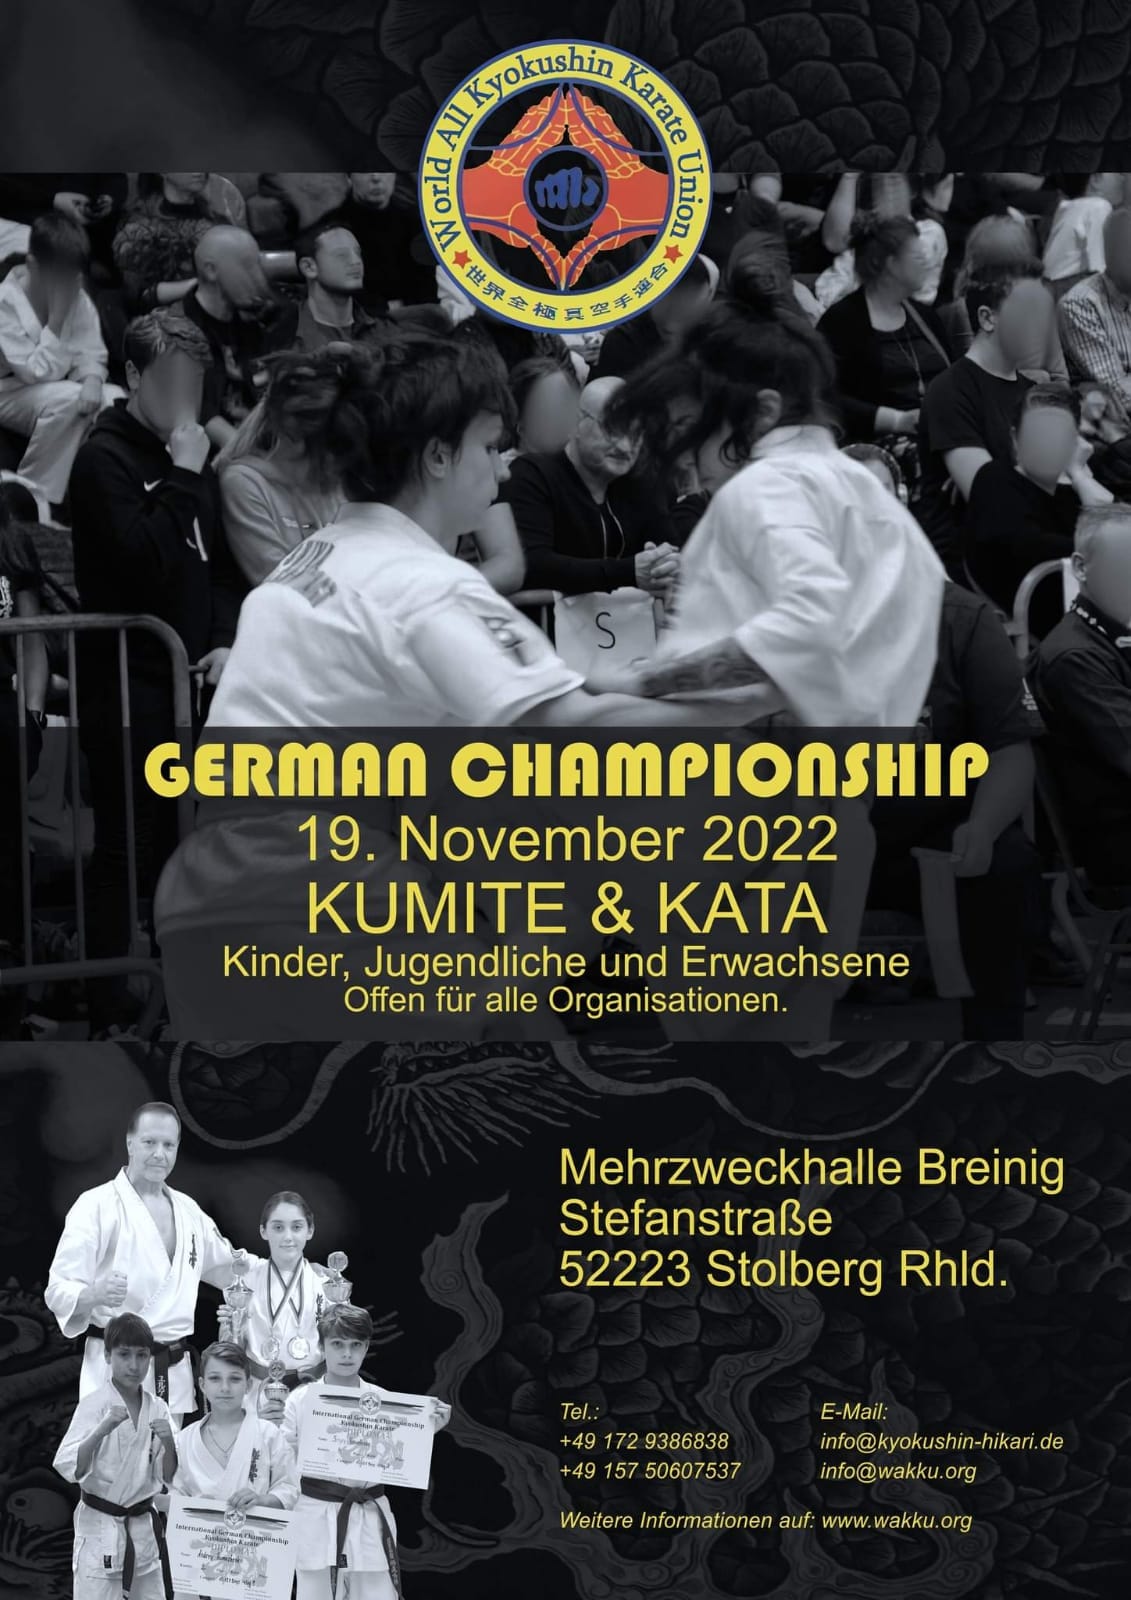 You are currently viewing German Championship 2022 in Stolberg